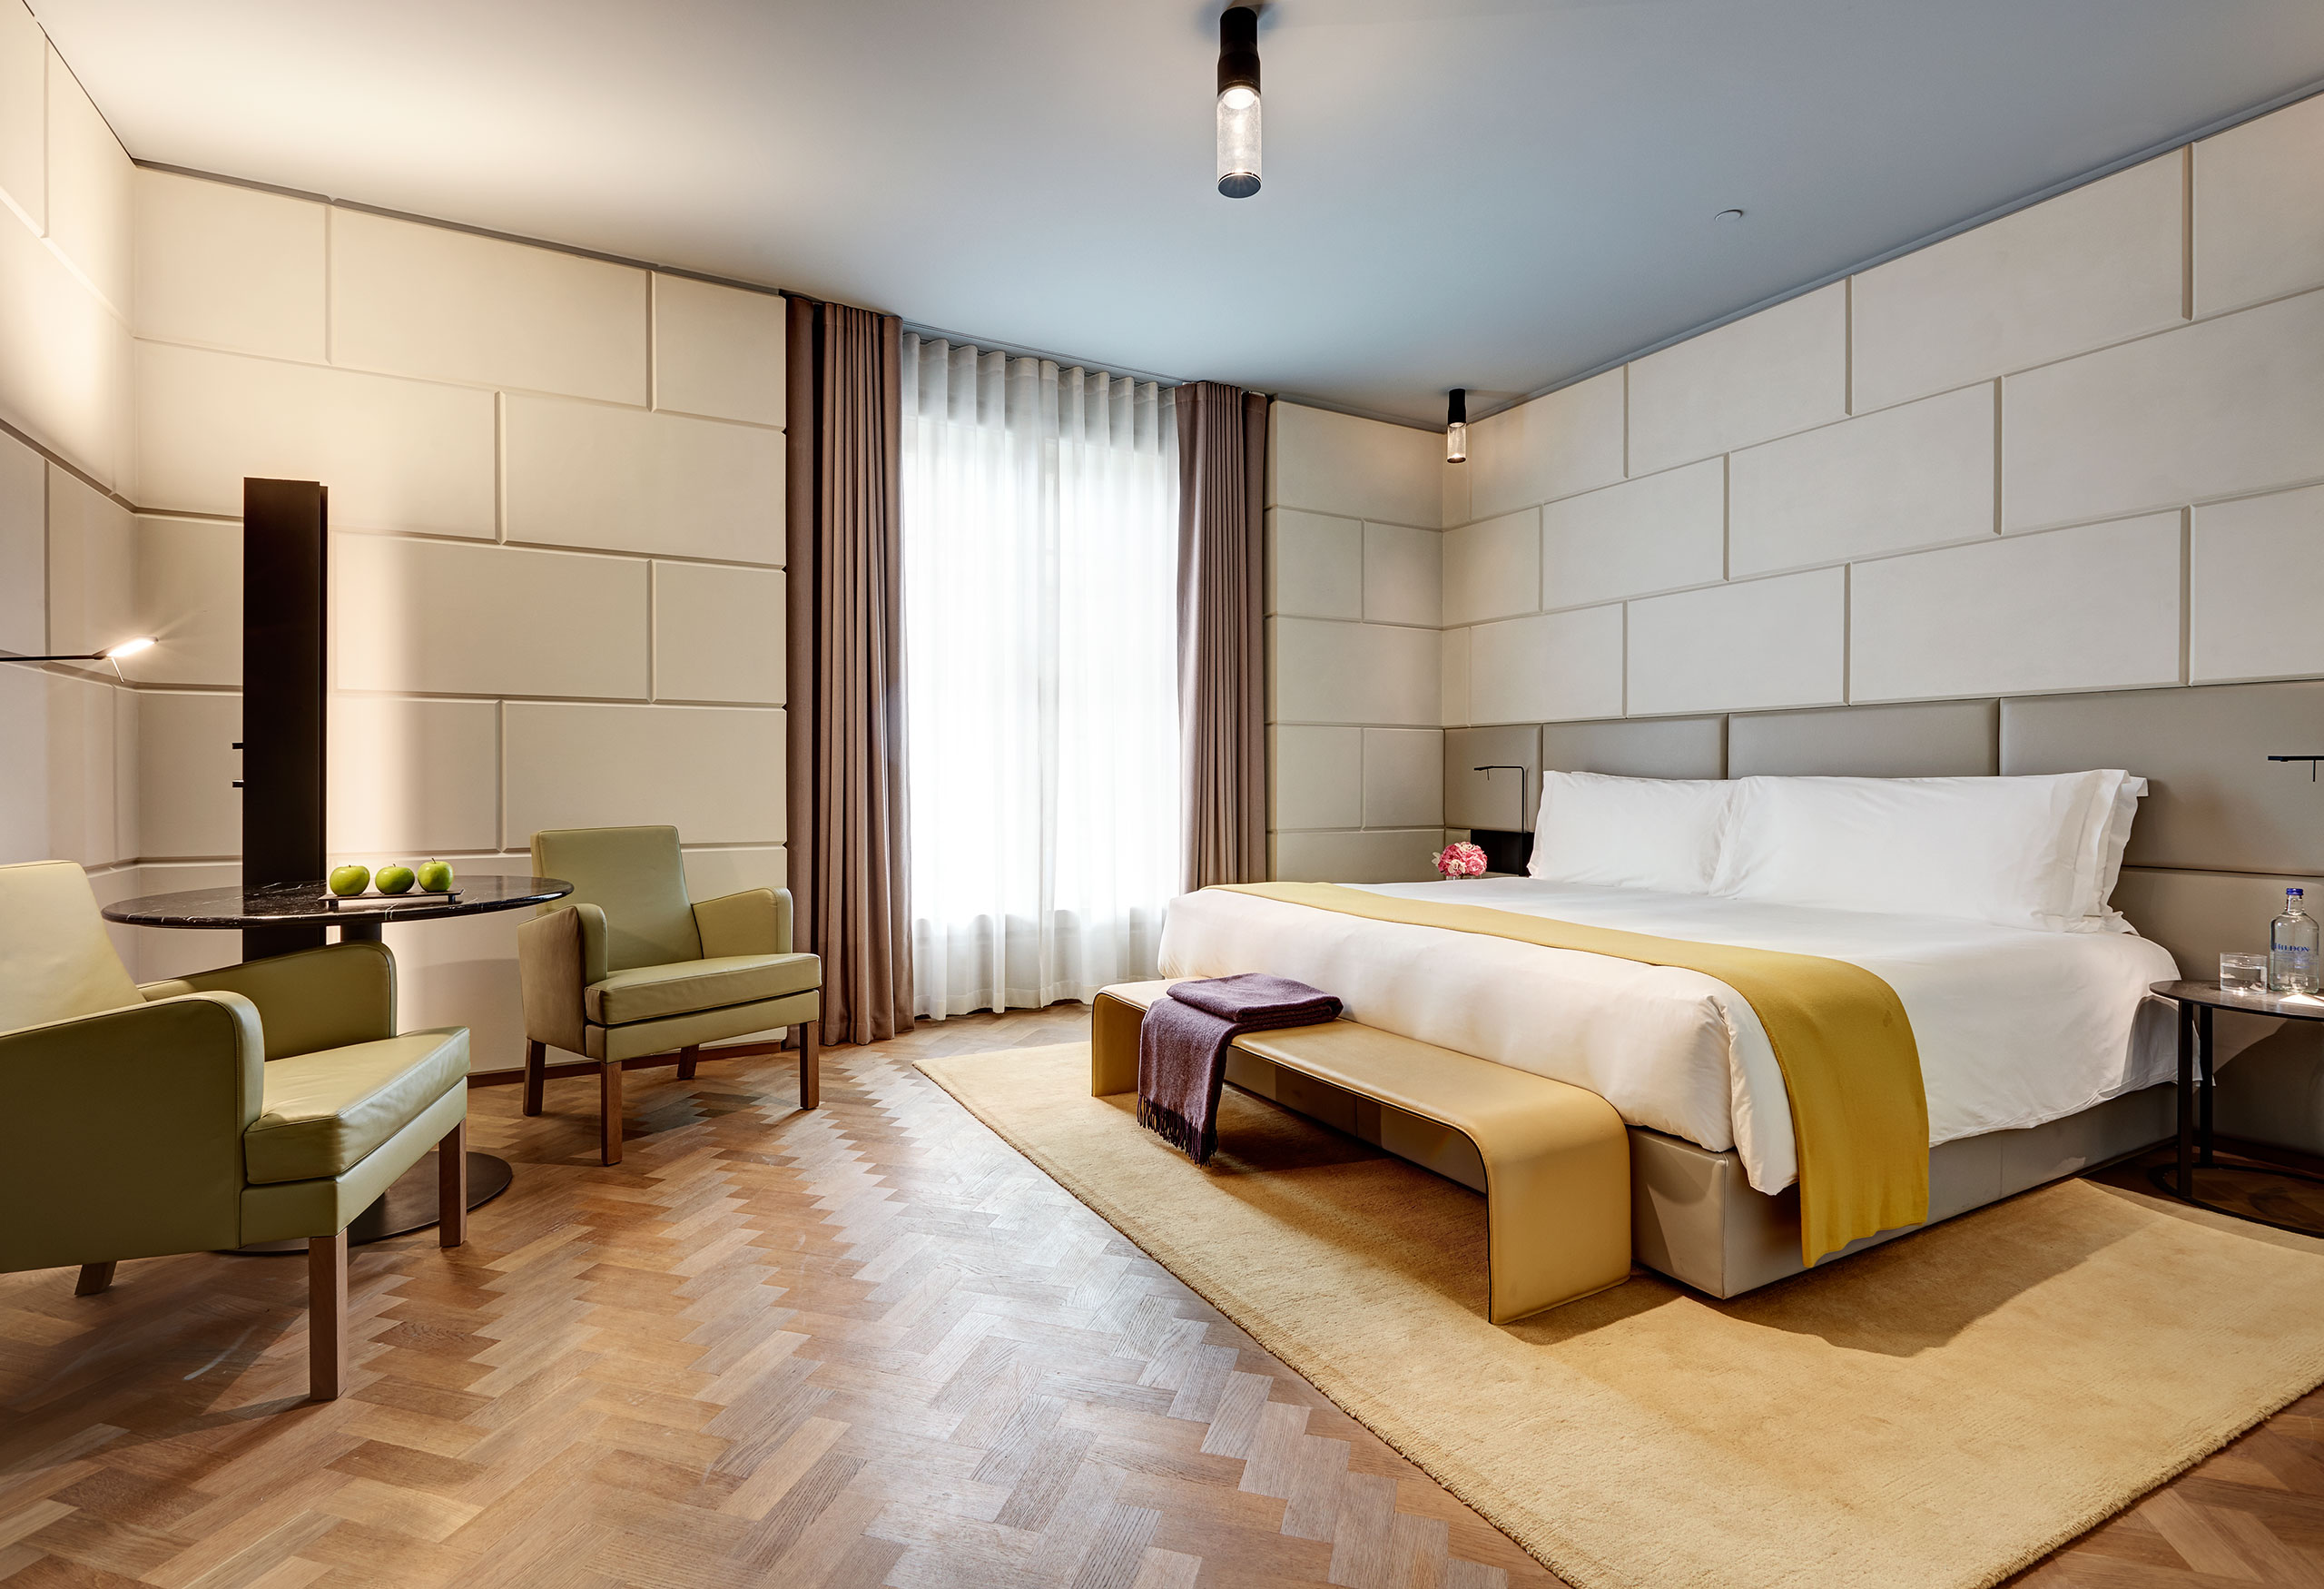 Chevron parquet floors and muted colors in the Regent Suite bedroom